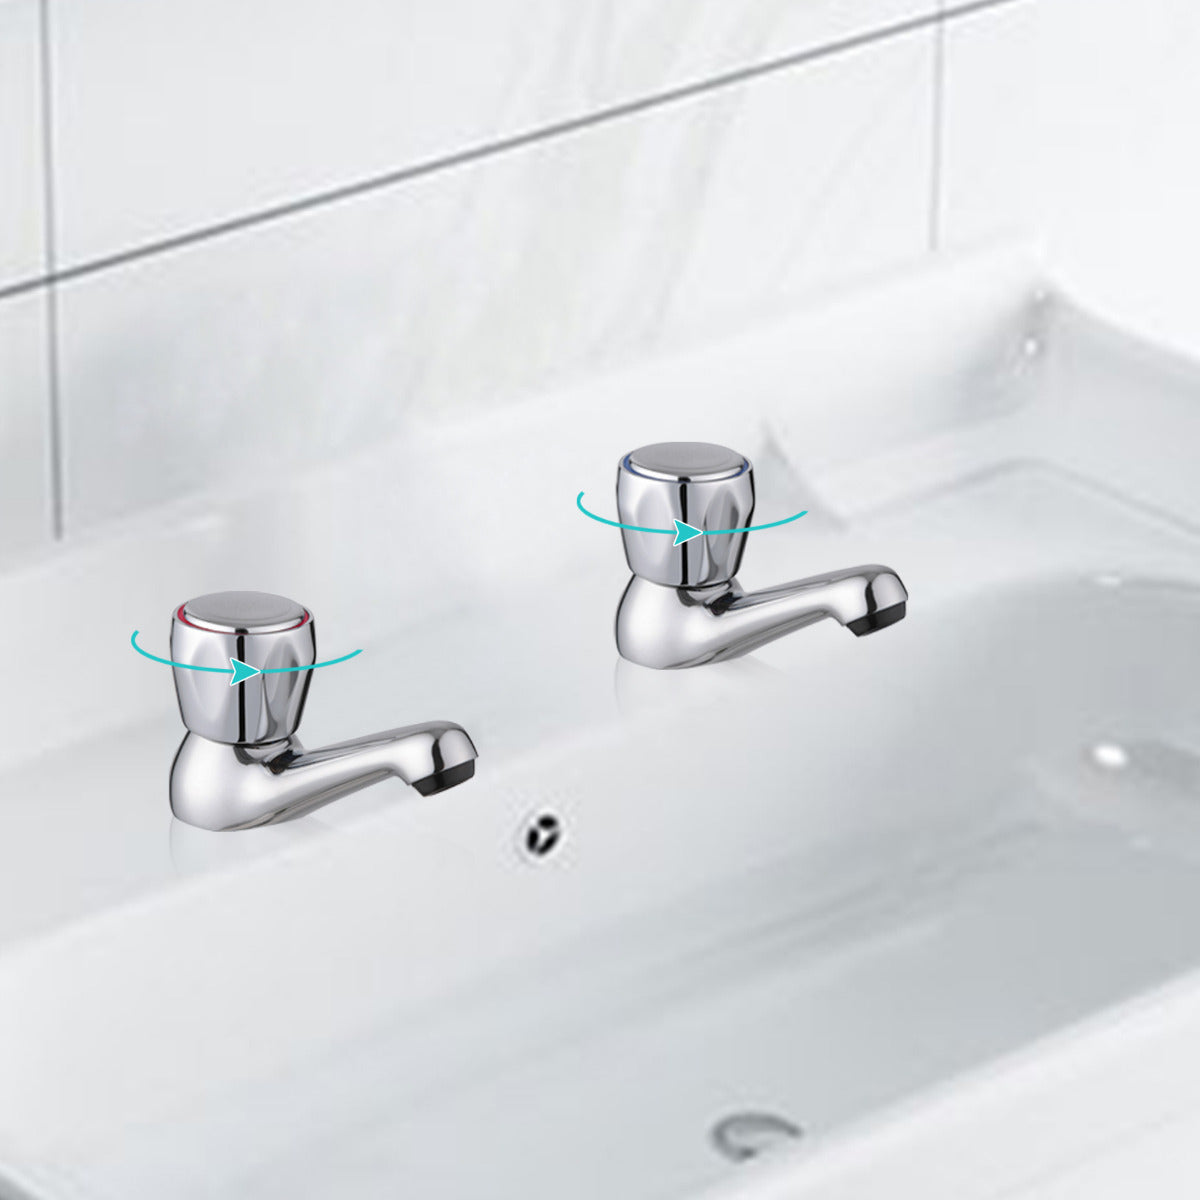 JassferryJASSFERRY New Pair of Basin Tap Hot and Cold Water Knob Handles 1/2" Bath FaucetBasin Taps